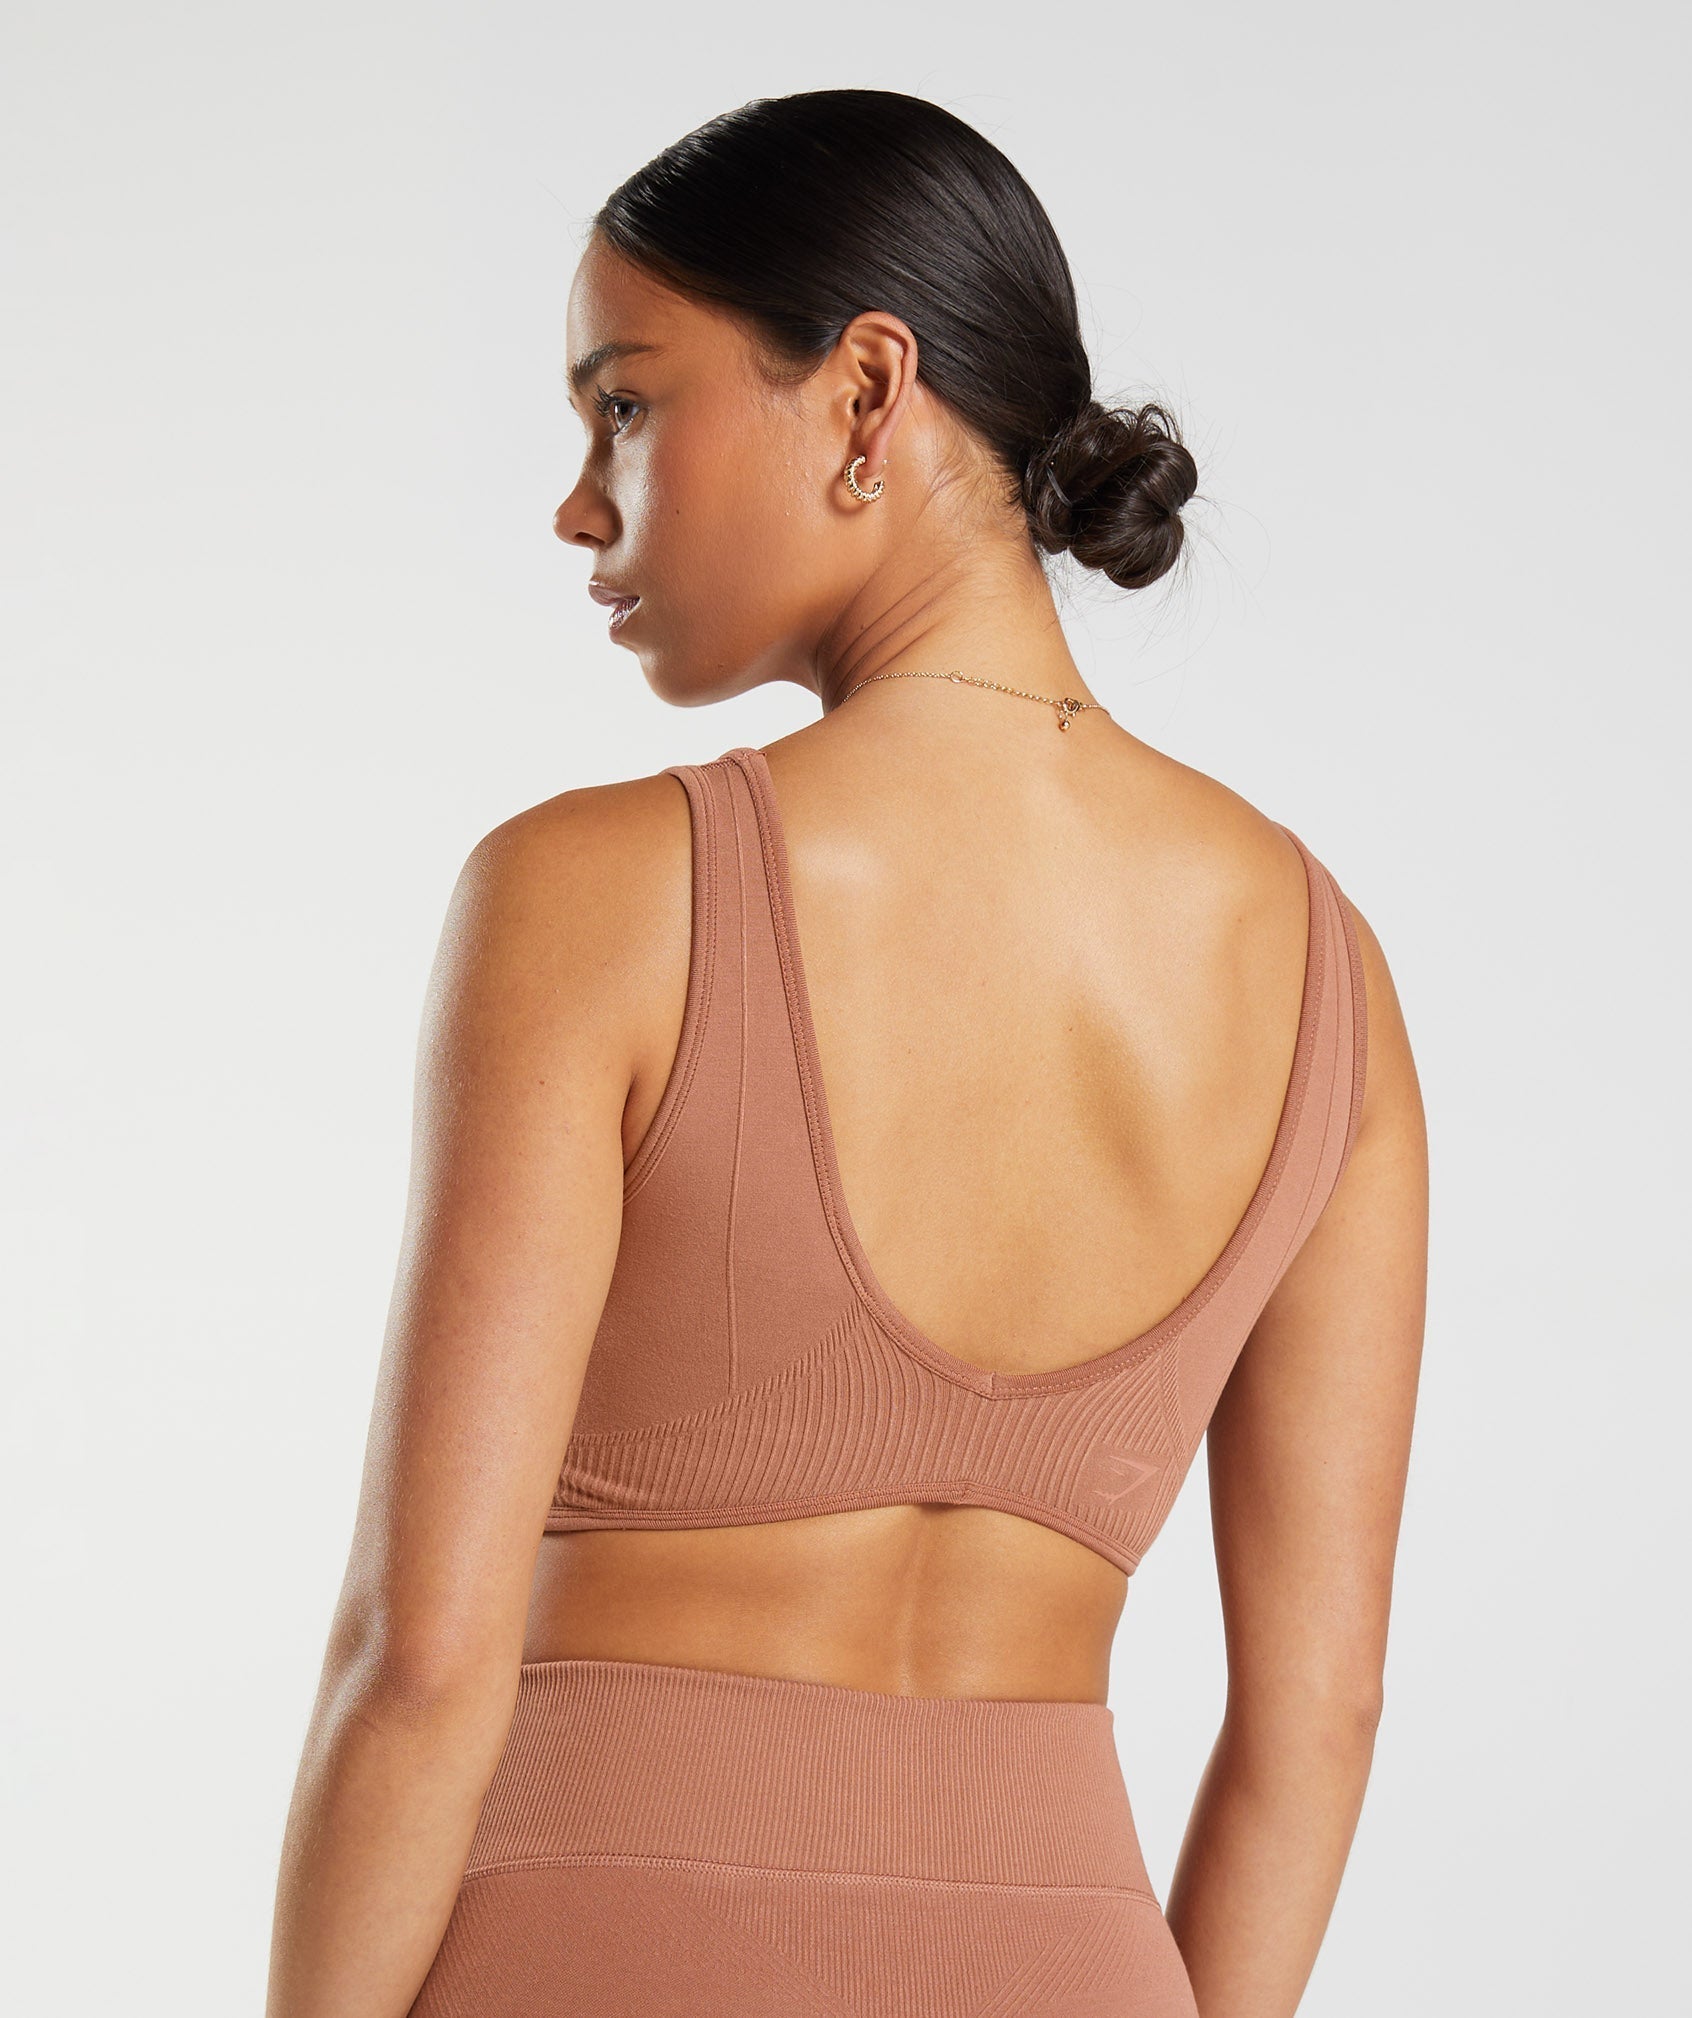 Rest Day Seamless Bralette in Coffee Brown - view 3